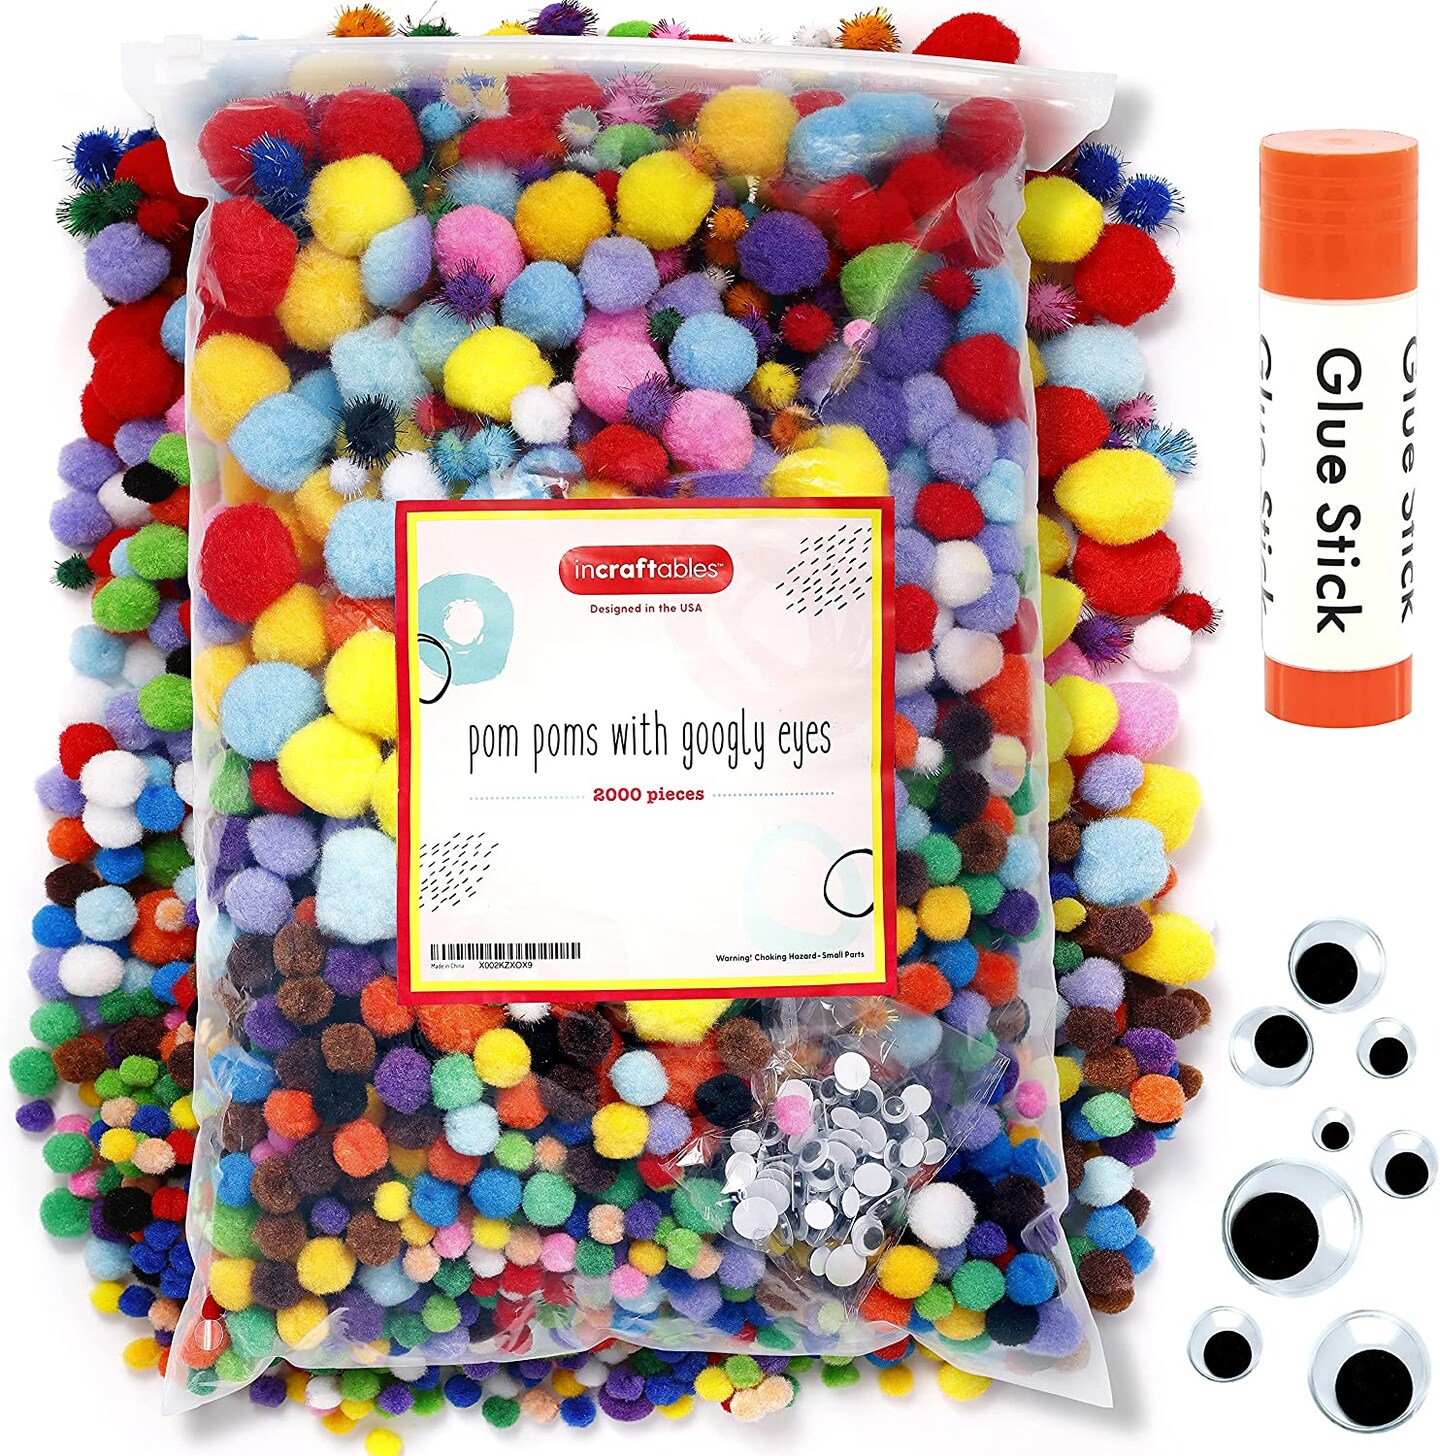 Essentials by Leisure Arts Pom Poms - Red -10mm - 100 Piece pom poms Arts  and Crafts - Colored Pompoms for Crafts - Craft pom poms - Puff Balls for  Crafts - Yahoo Shopping